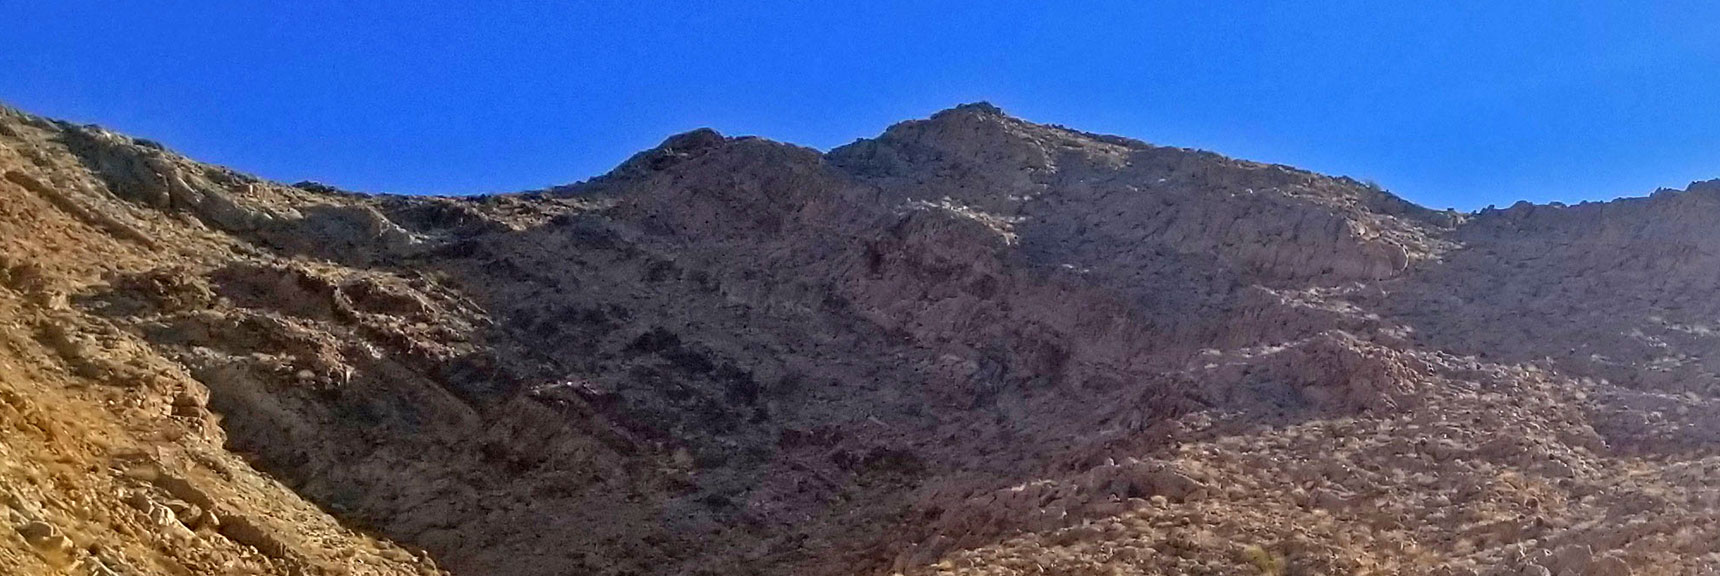 Continue up Cairn Wash or Take More Gradual Slopes to Left or Right? Will Return to Right Slope. | Sunrise Mountain, Las Vegas, Nevada